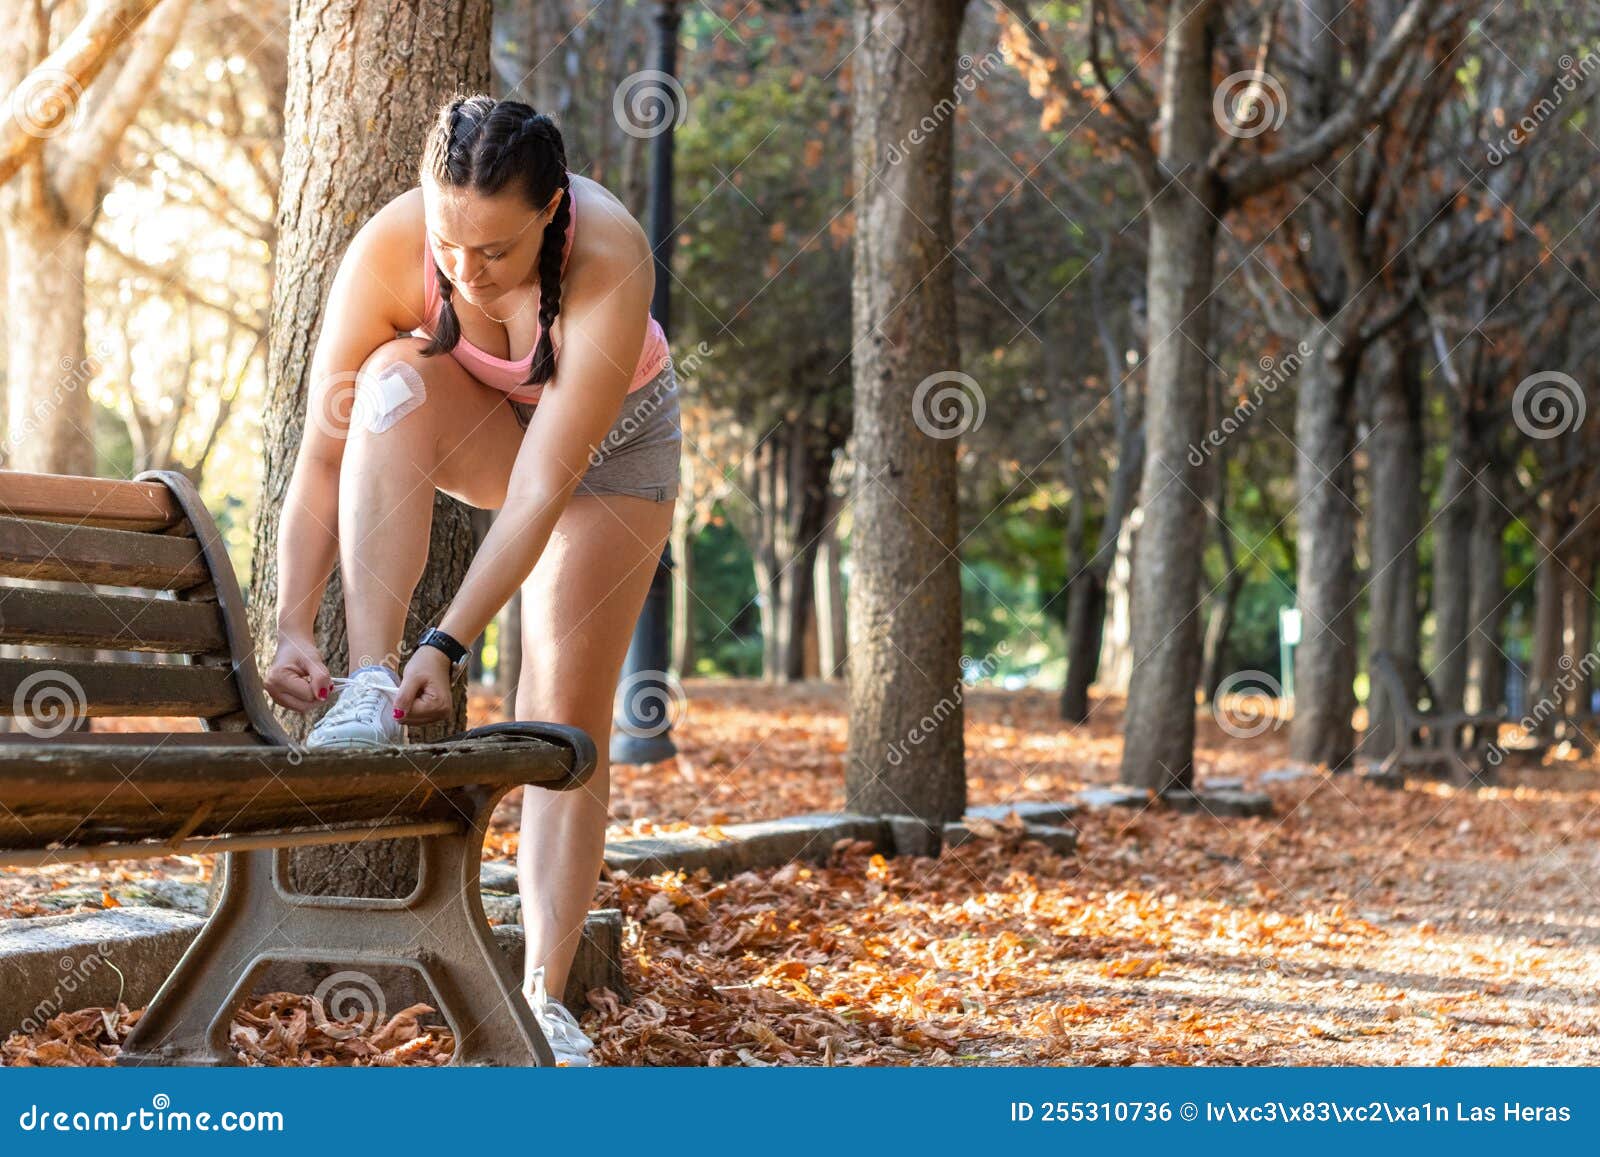 portrait of a woman lacing up her sneakers for sports in a park in autumn